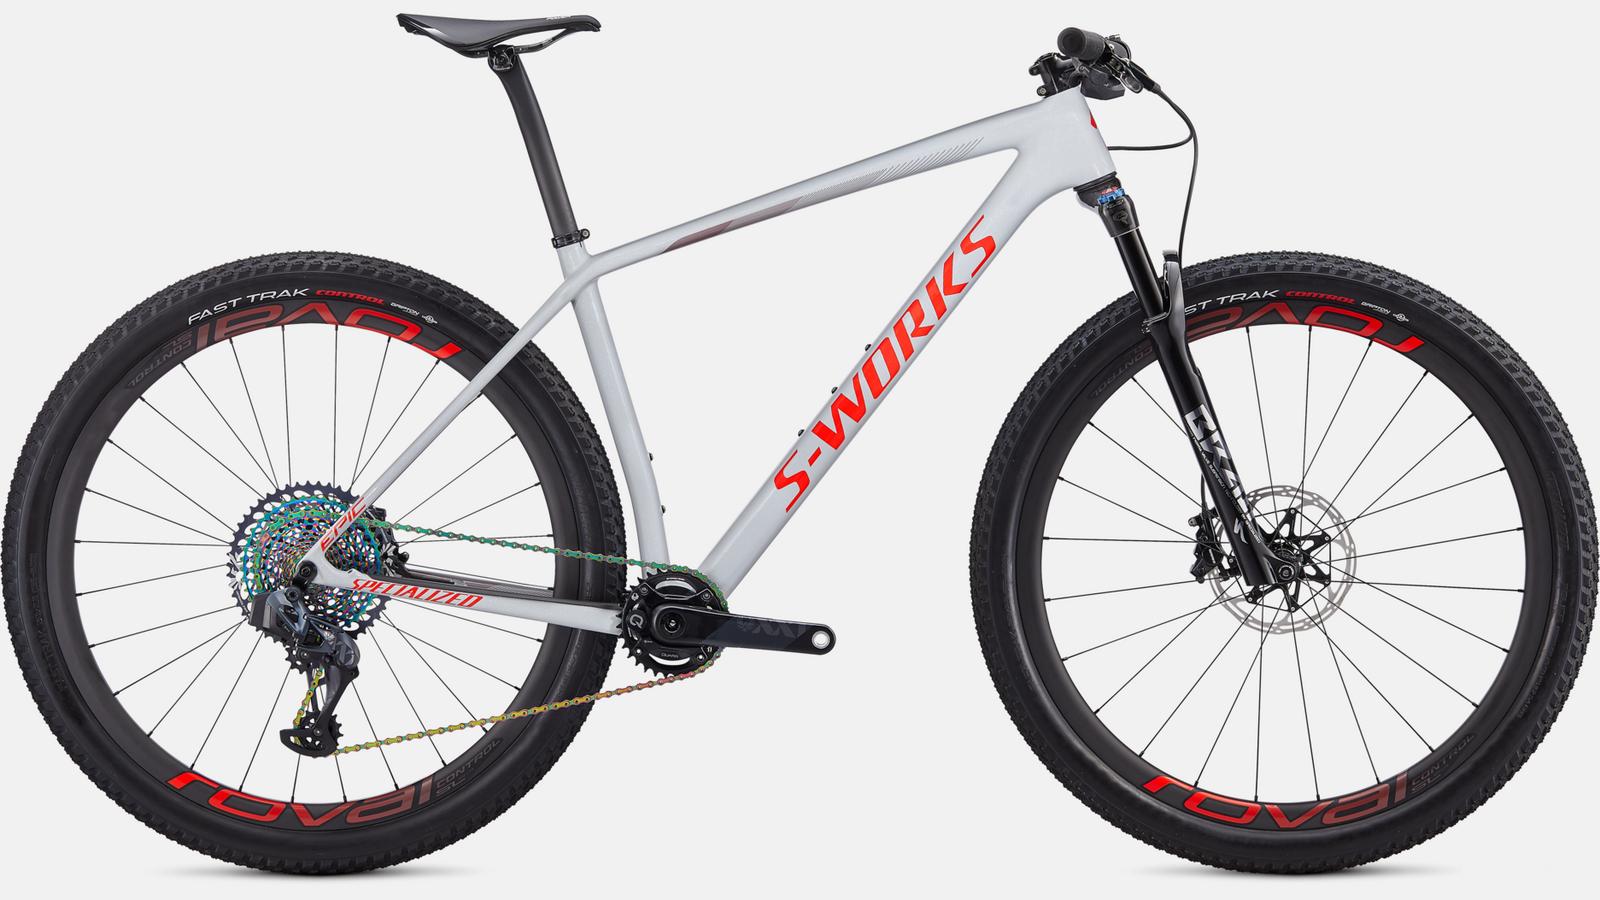 Paint for 2020 Specialized S-Works Epic Hardtail AXS - Gloss Dove Grey